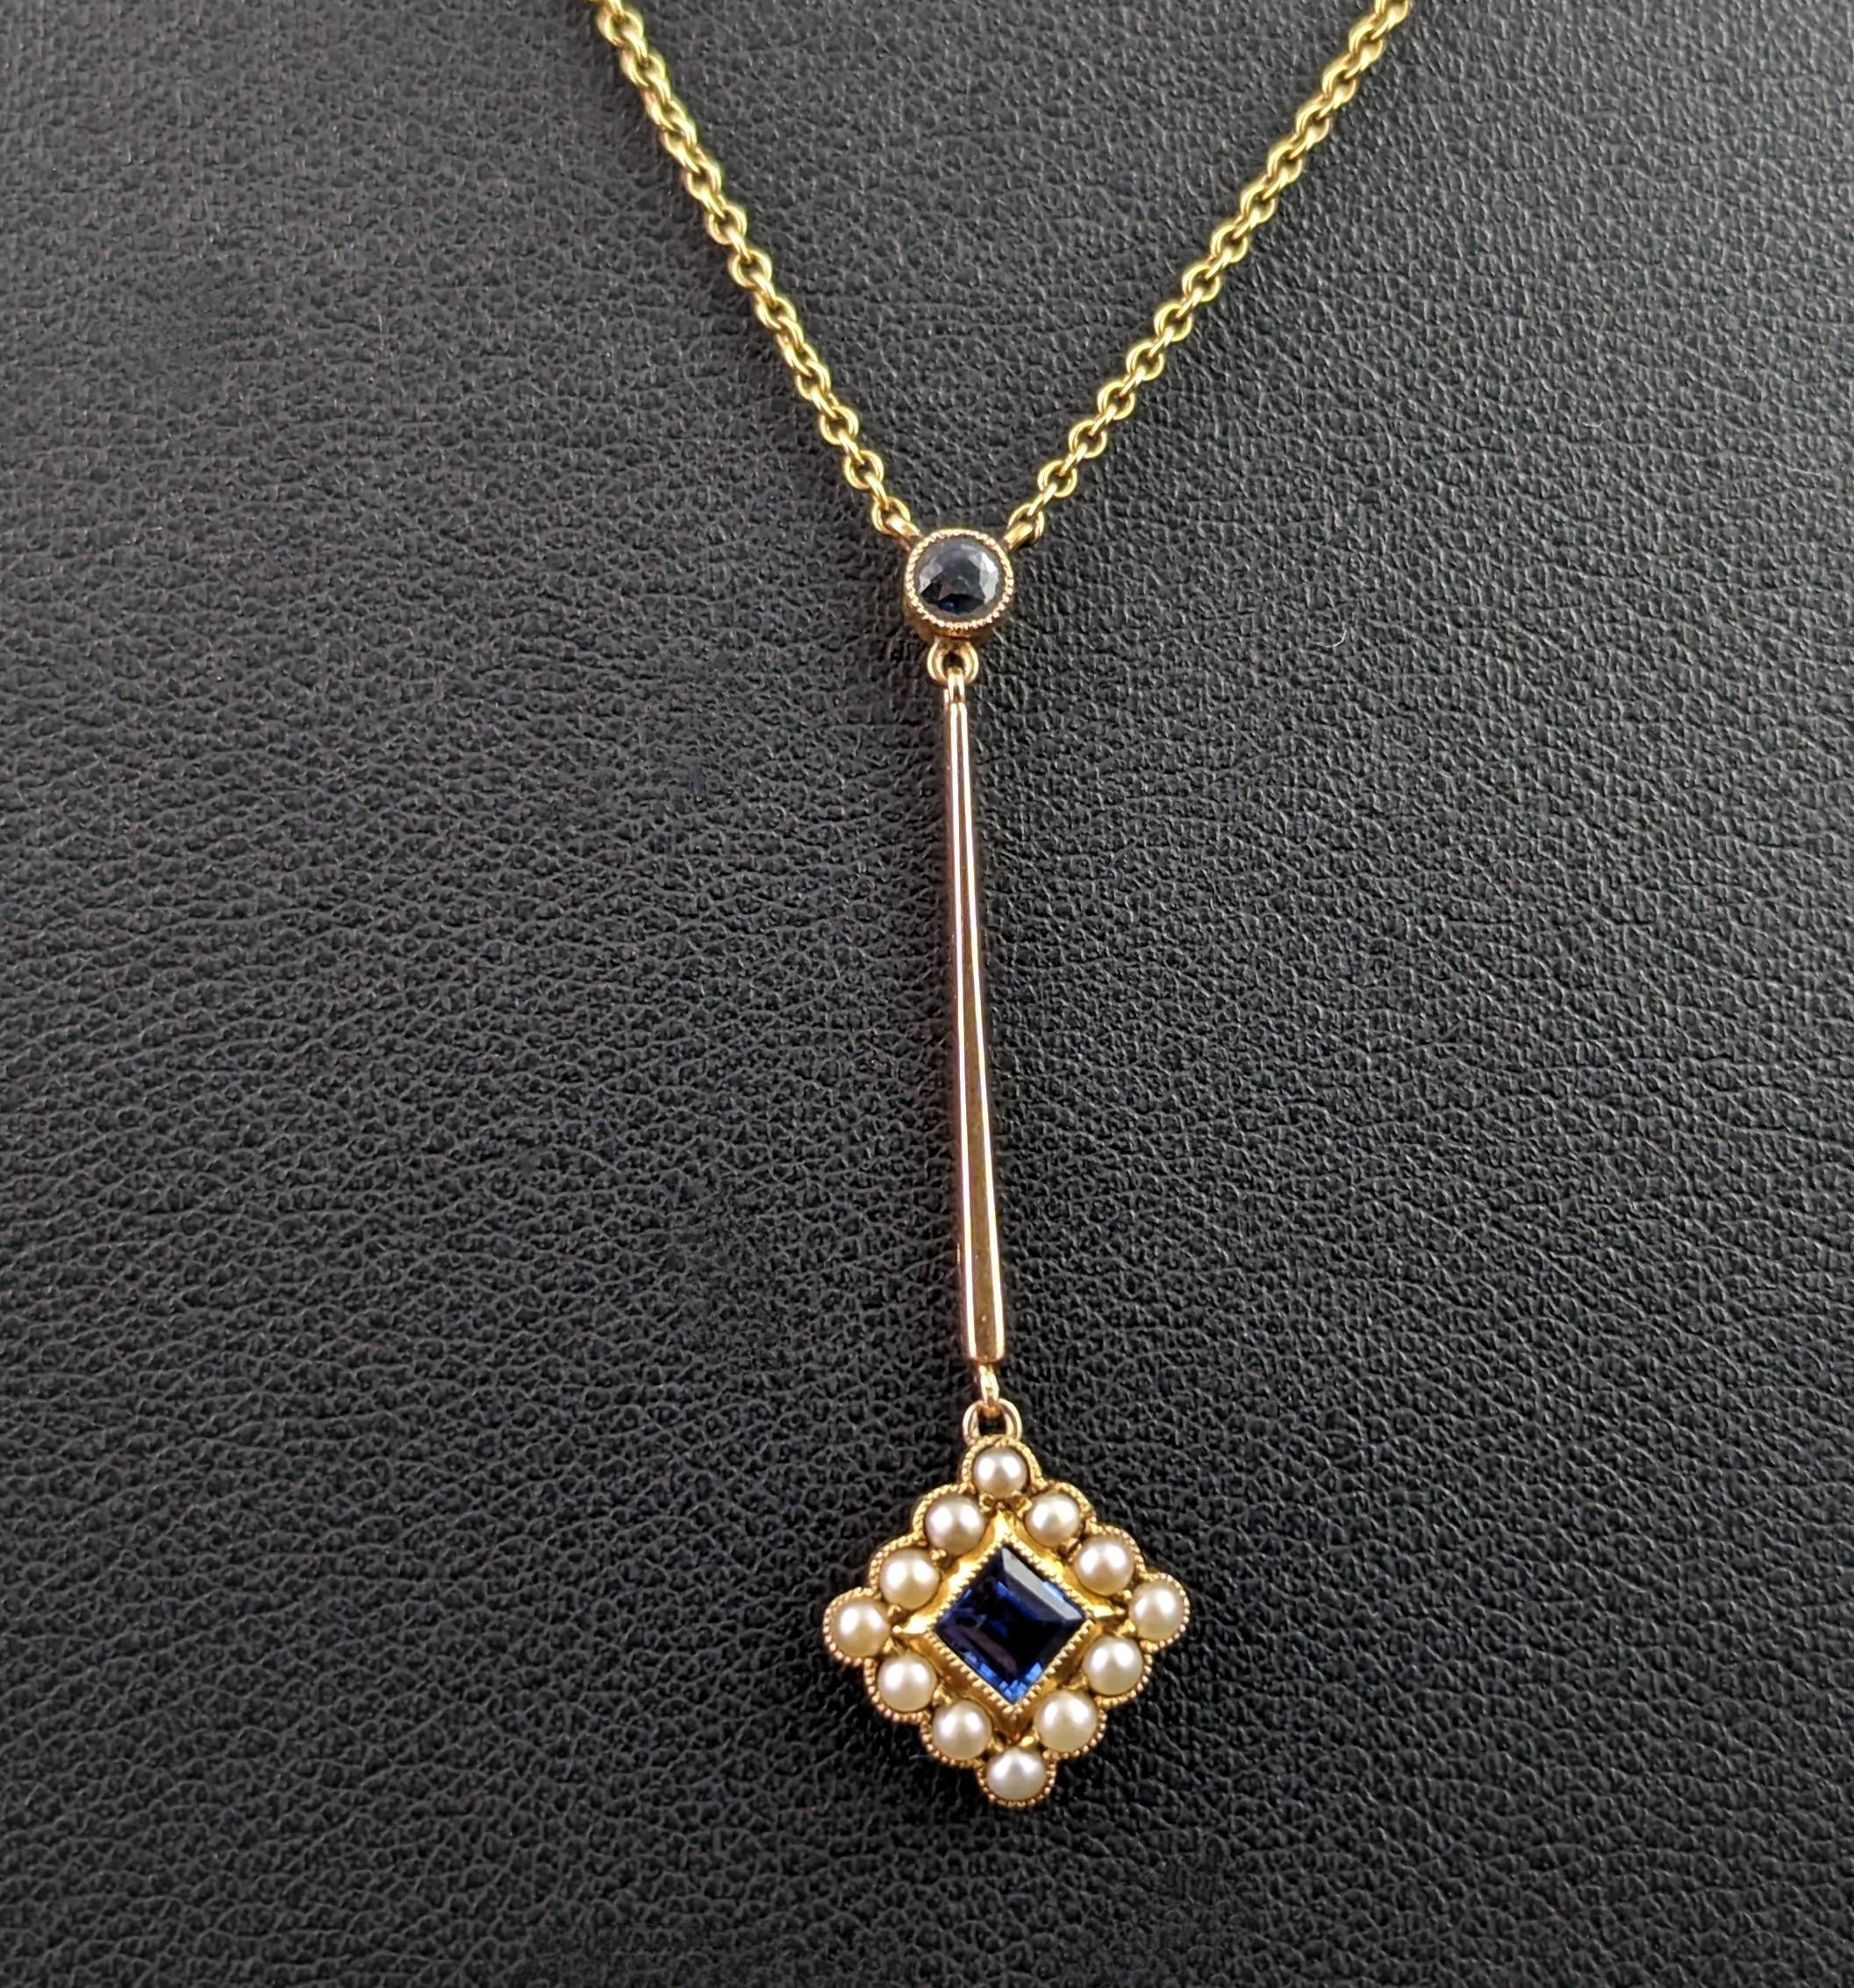 Antique Sapphire and Pearl drop pendant necklace, 15k yellow gold  5